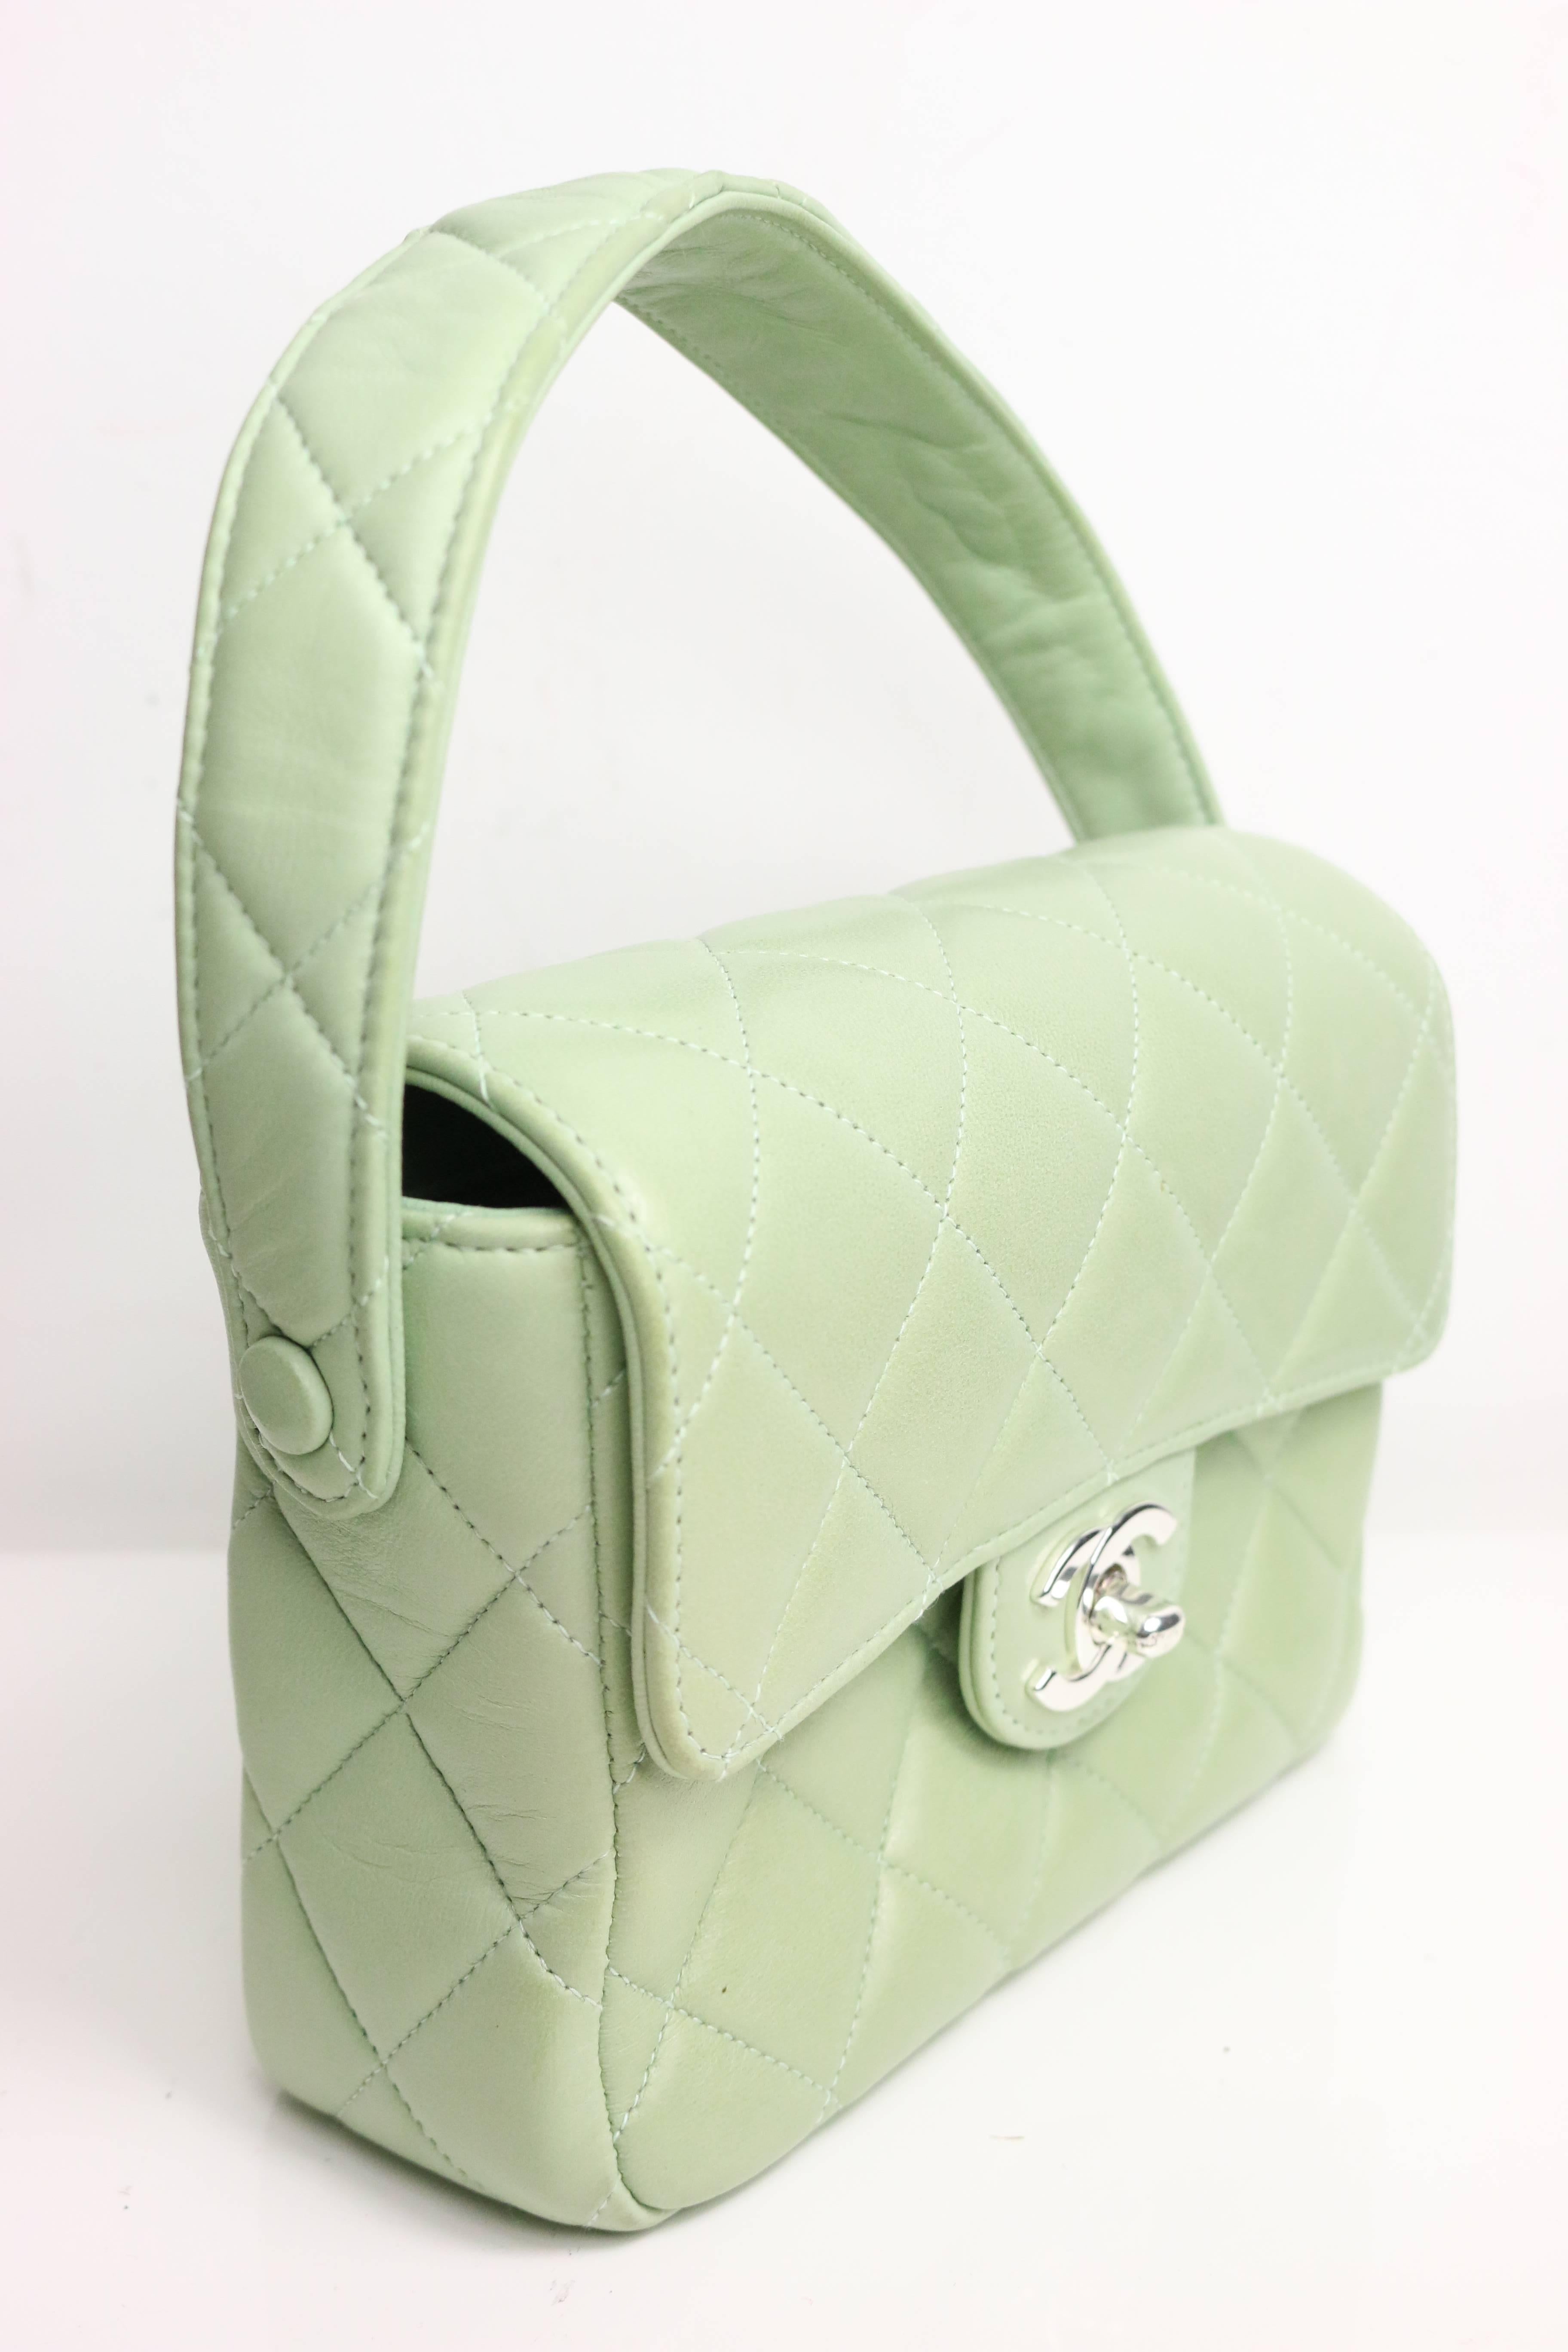 - Chanel green lambskin leather quilted mini flap strap handbag from 1996-1997 collection.  

 - Long: 17cm I Height(with strap): 19cm I Width: 6cm. 

- Includes: Authenticity card, box. 

- Condition: Excellent preowned condition. Please note this